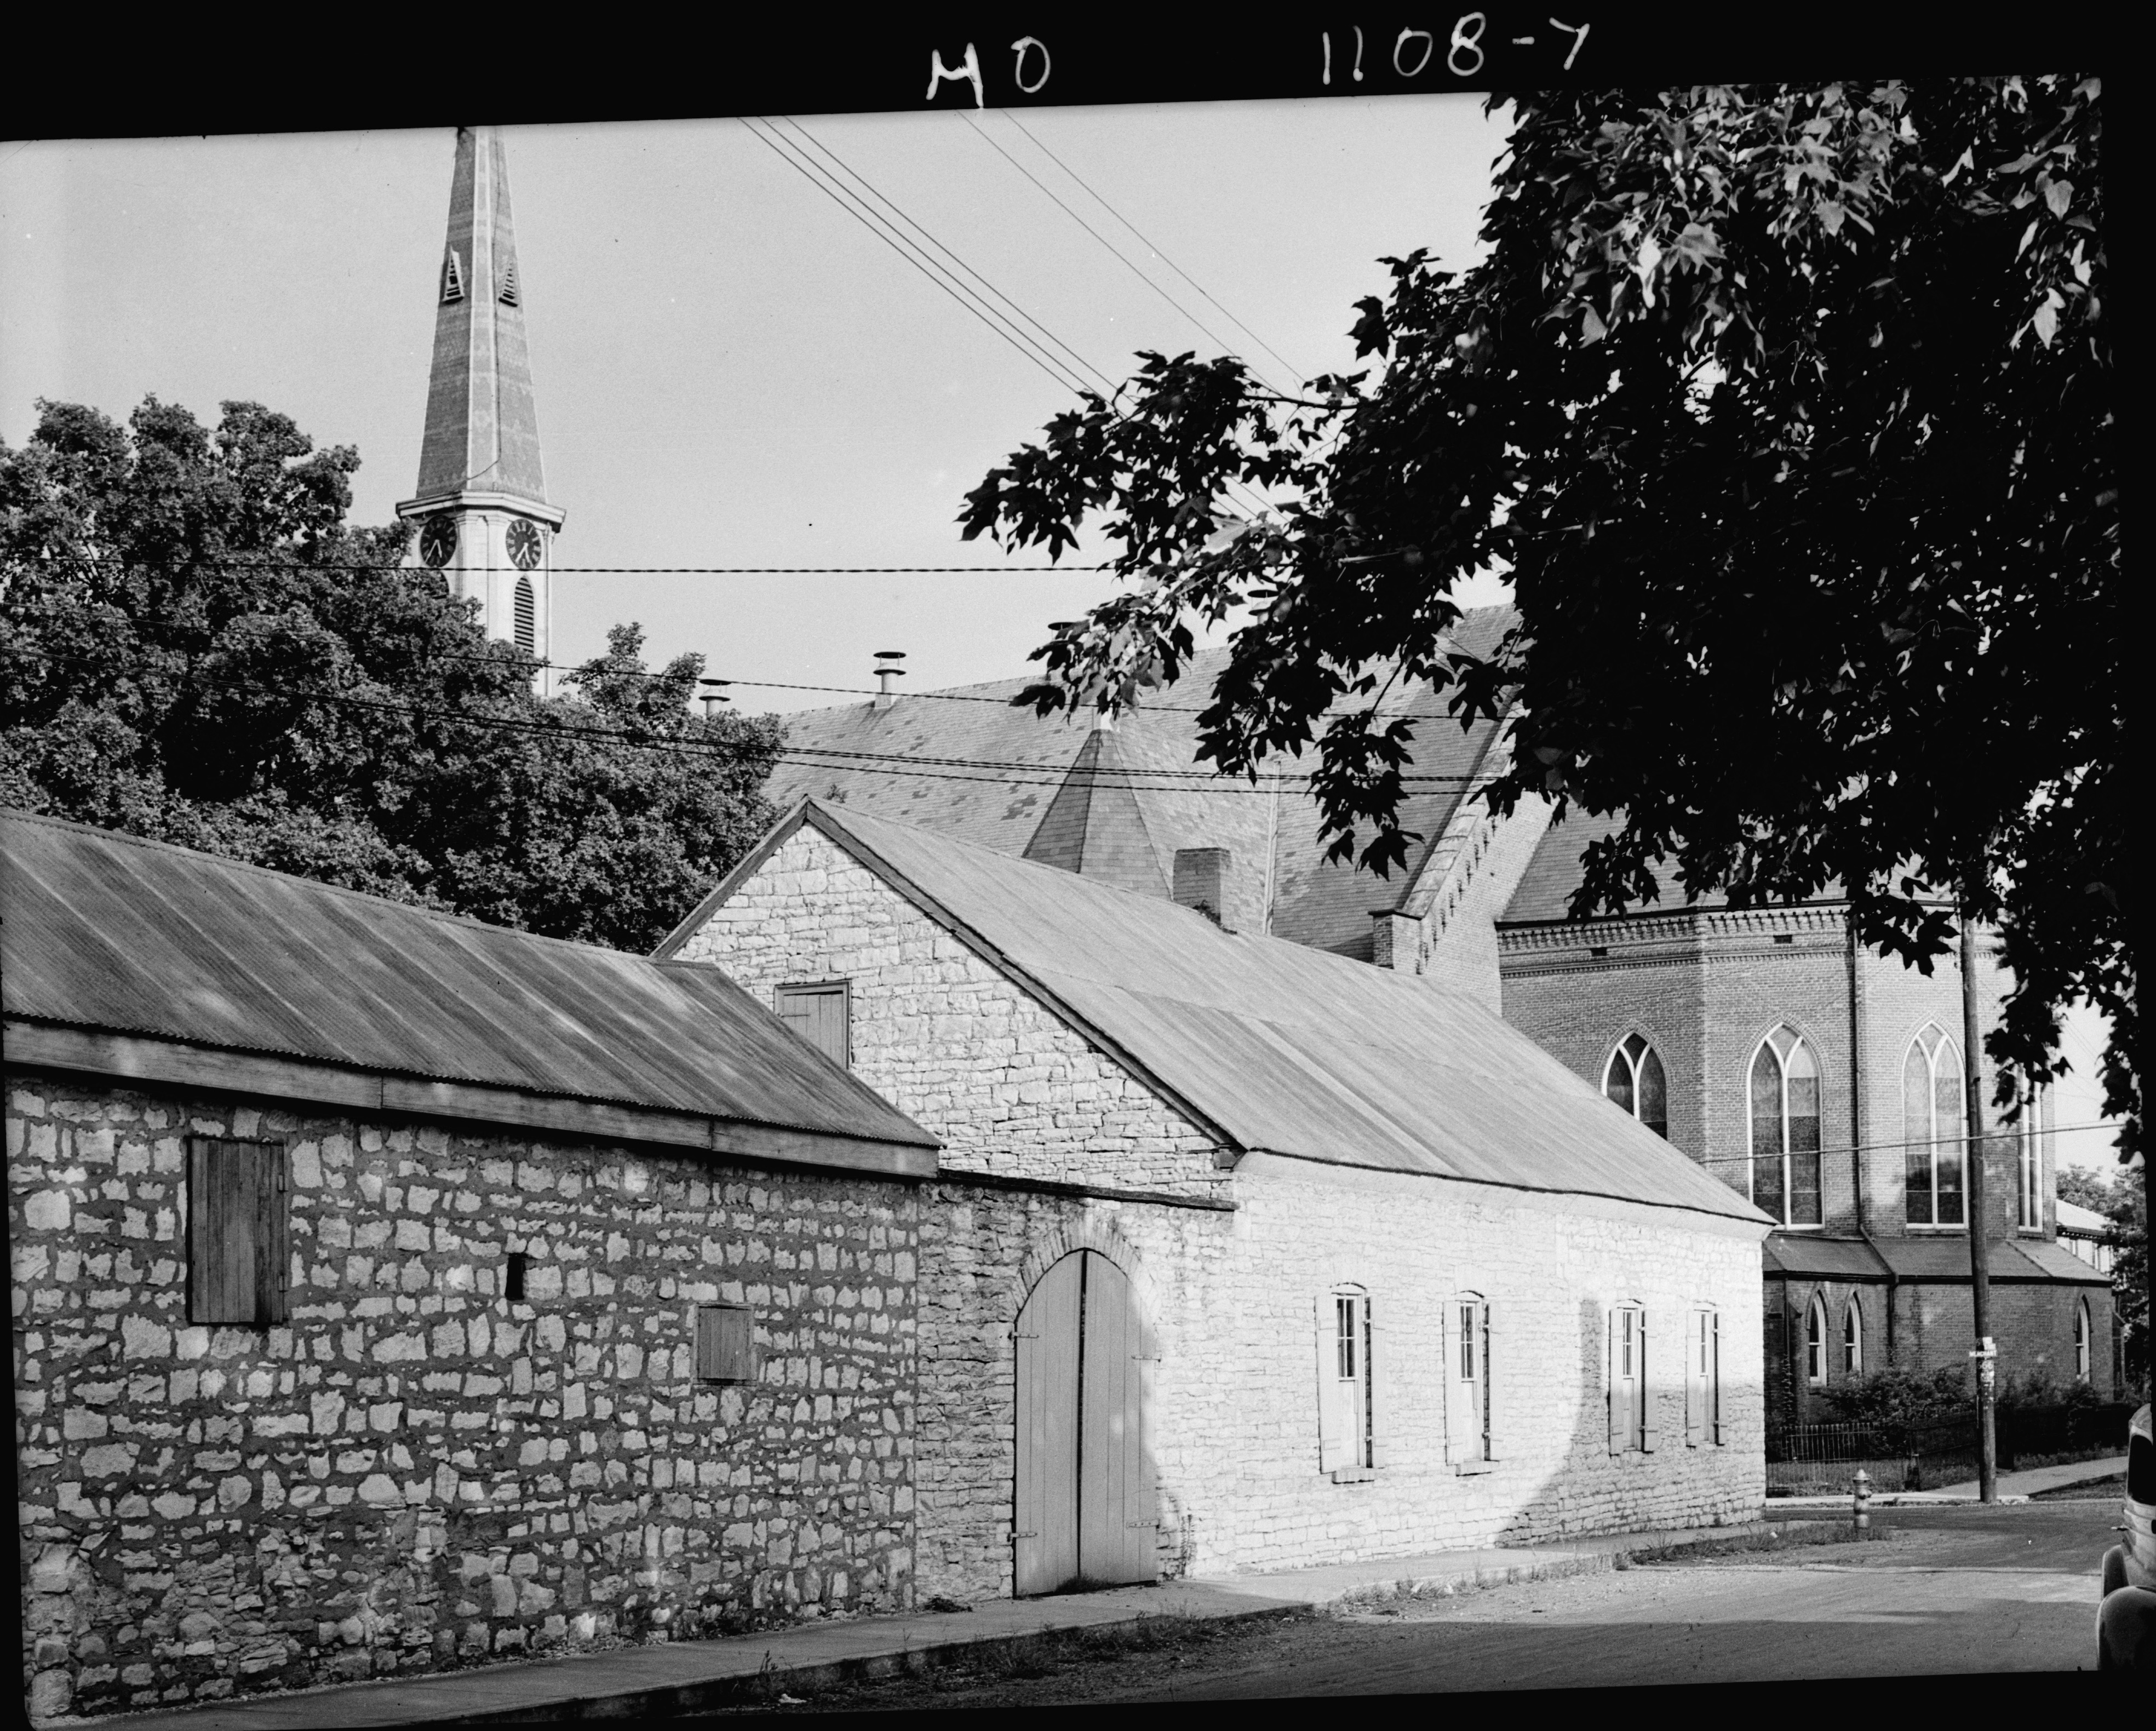 Photograph of the Pratte Warehouse and Church in in Ste Genevieve MO